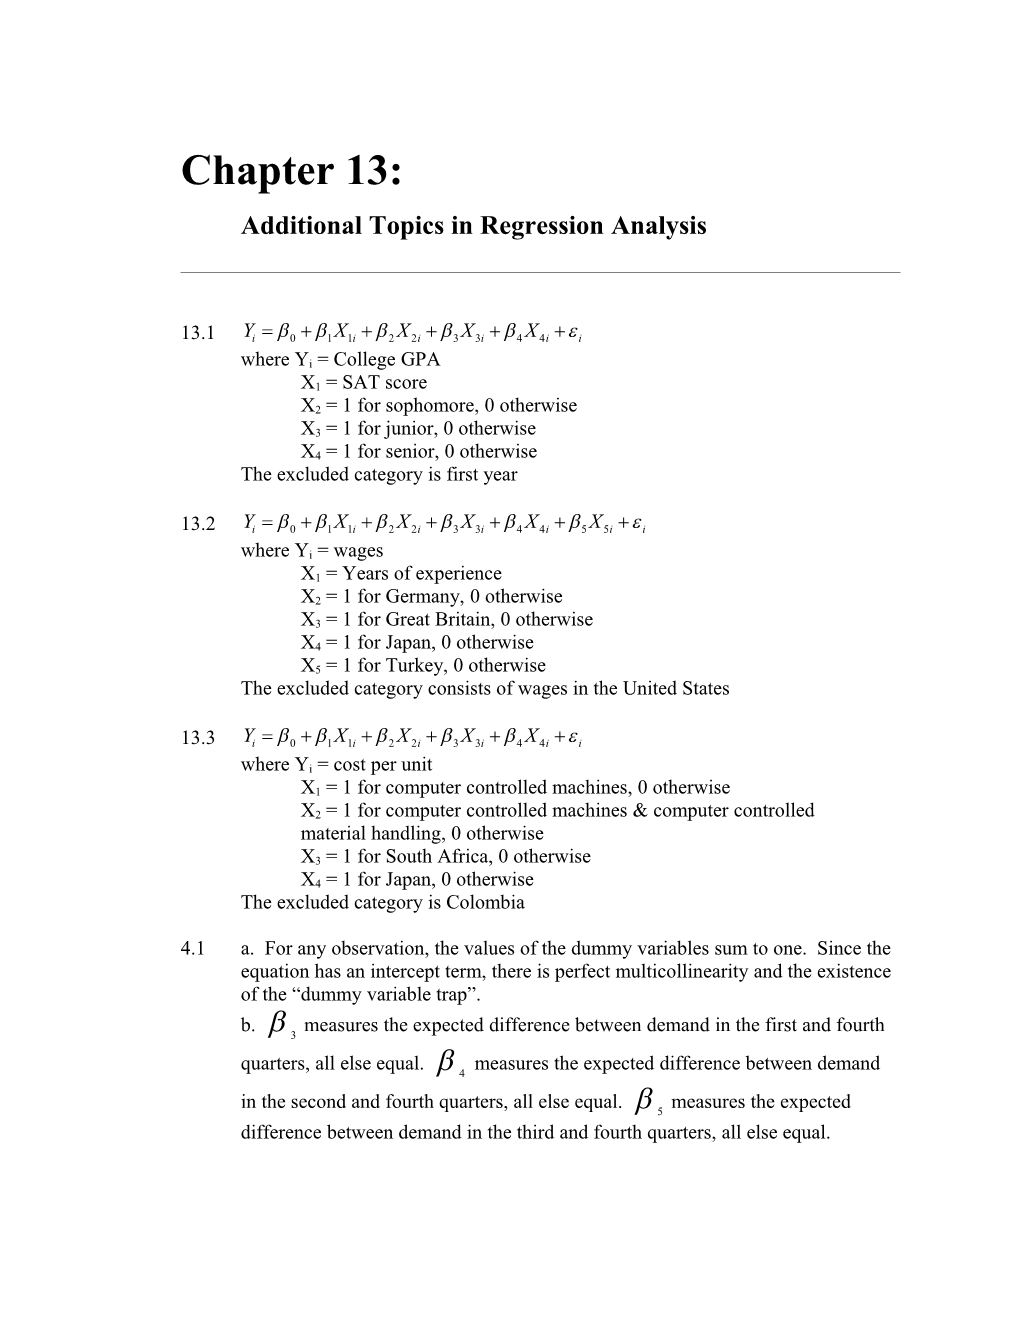 Additional Topics in Regression Analysis